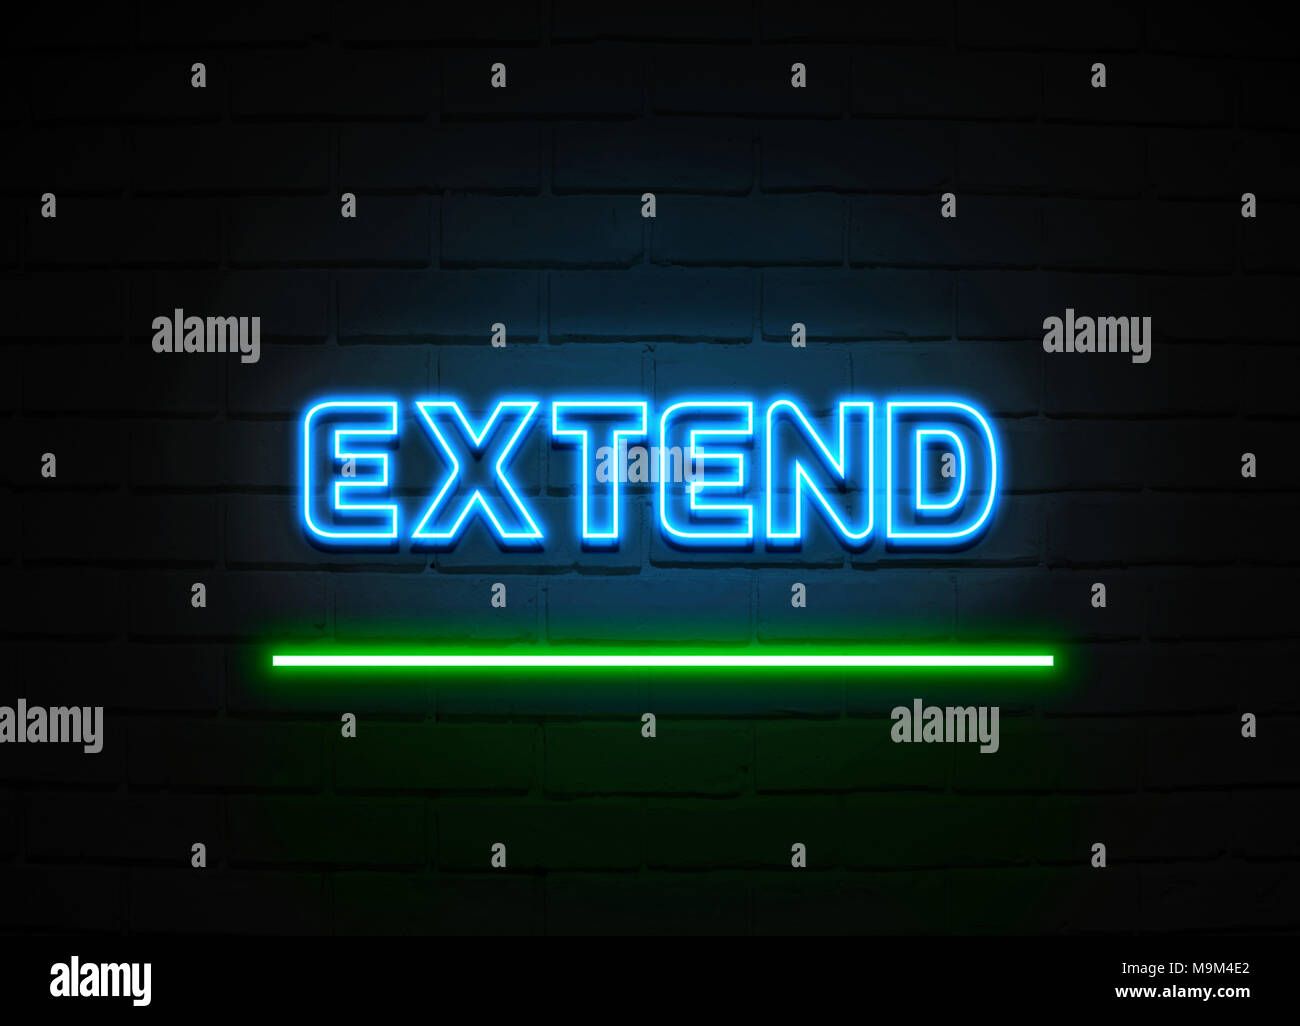 Extend neon sign - Glowing Neon Sign on brickwall wall - 3D rendered royalty free stock illustration. Stock Photo